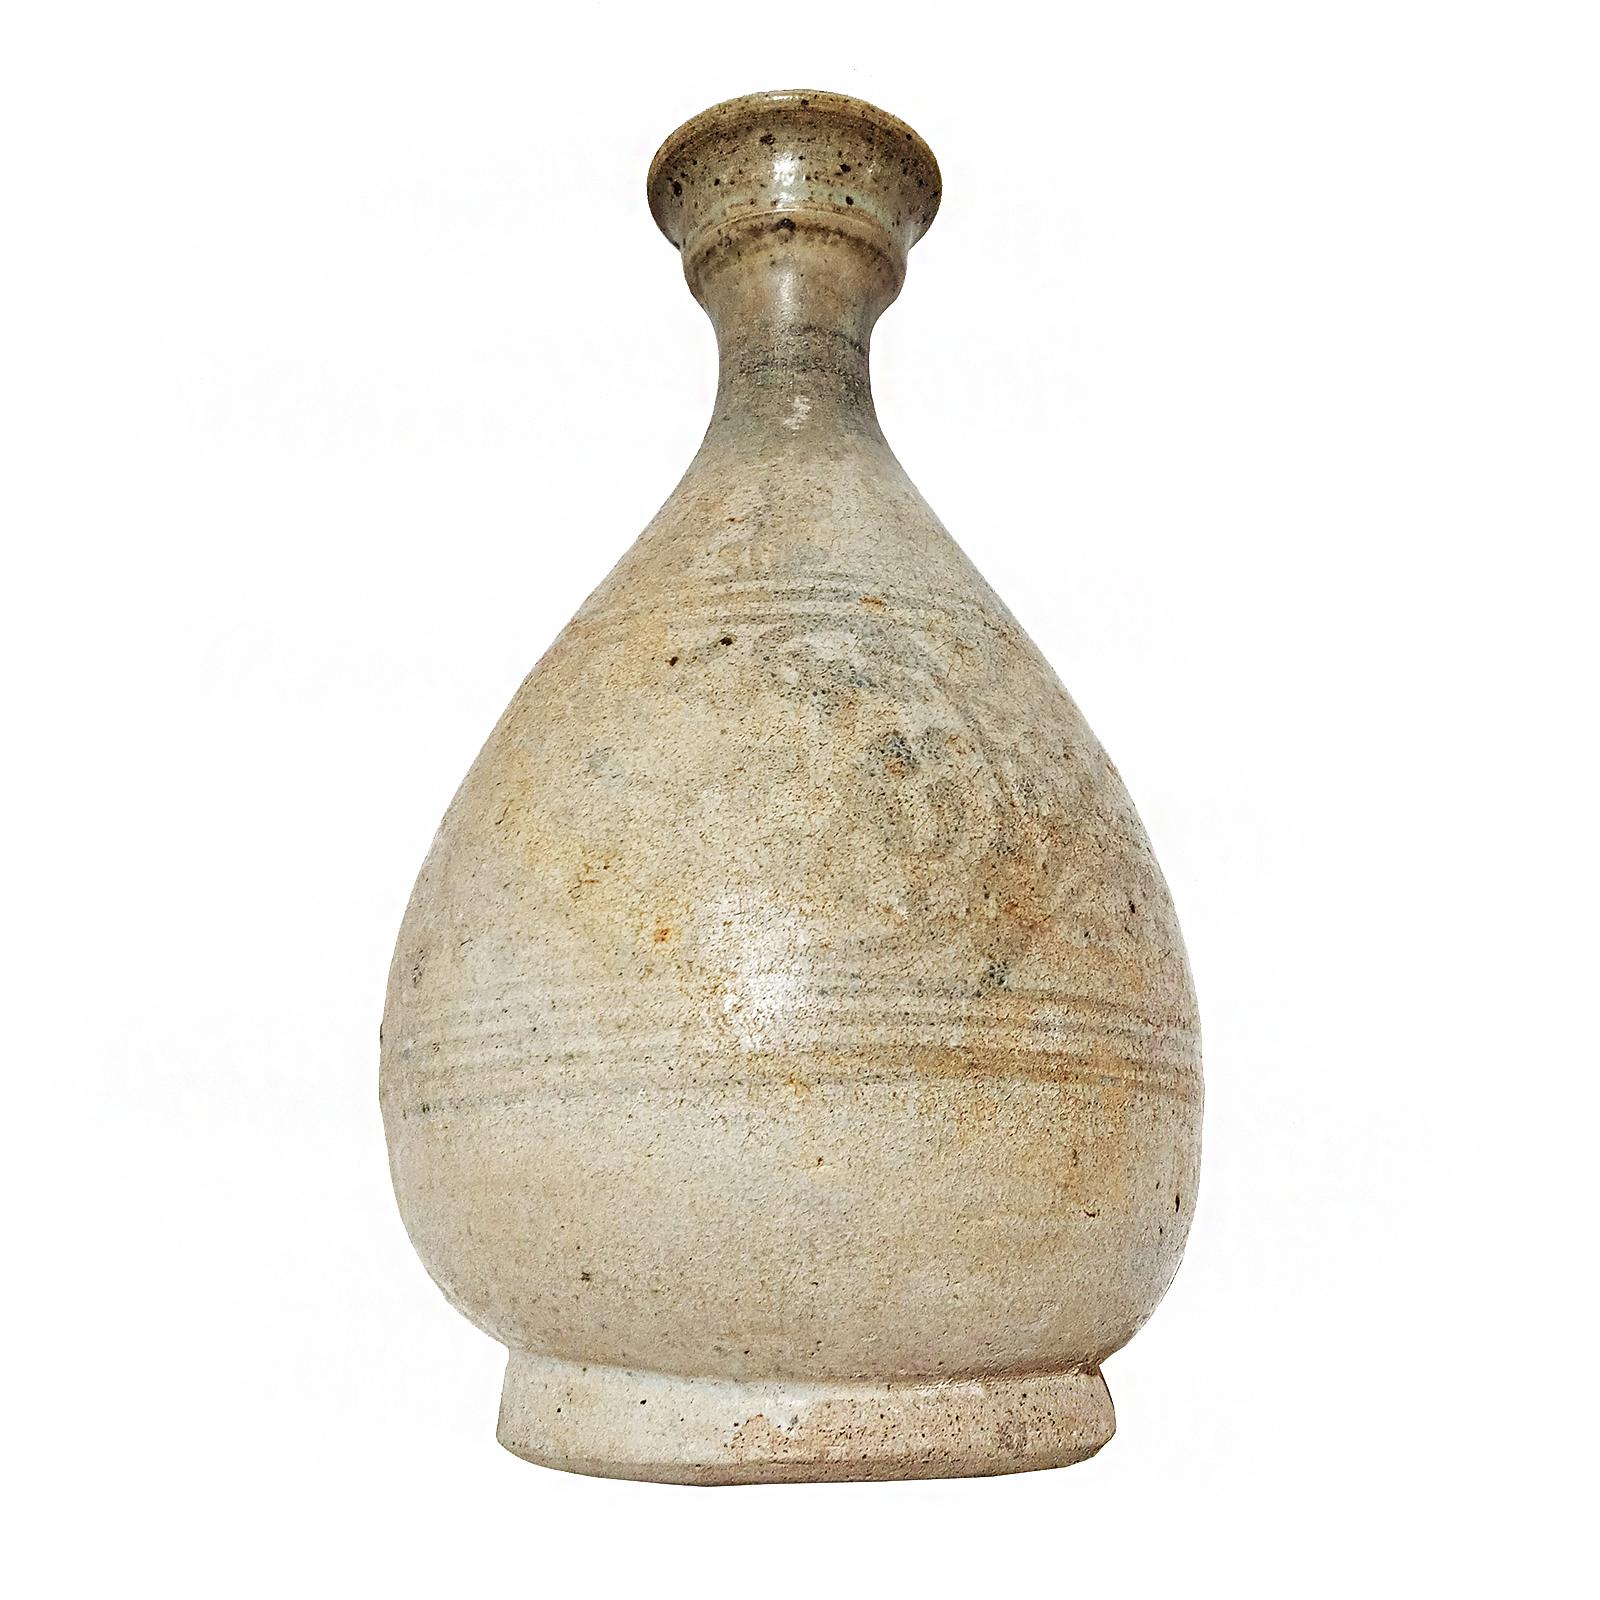 A ceramic vase from Thailand, with light cream glaze and painted floral decorations. Late 19th Century. 

While the golden age of Thai ceramics ended around the 15-16th Centuries, Thai craftsmen learned the art through generations, later producing